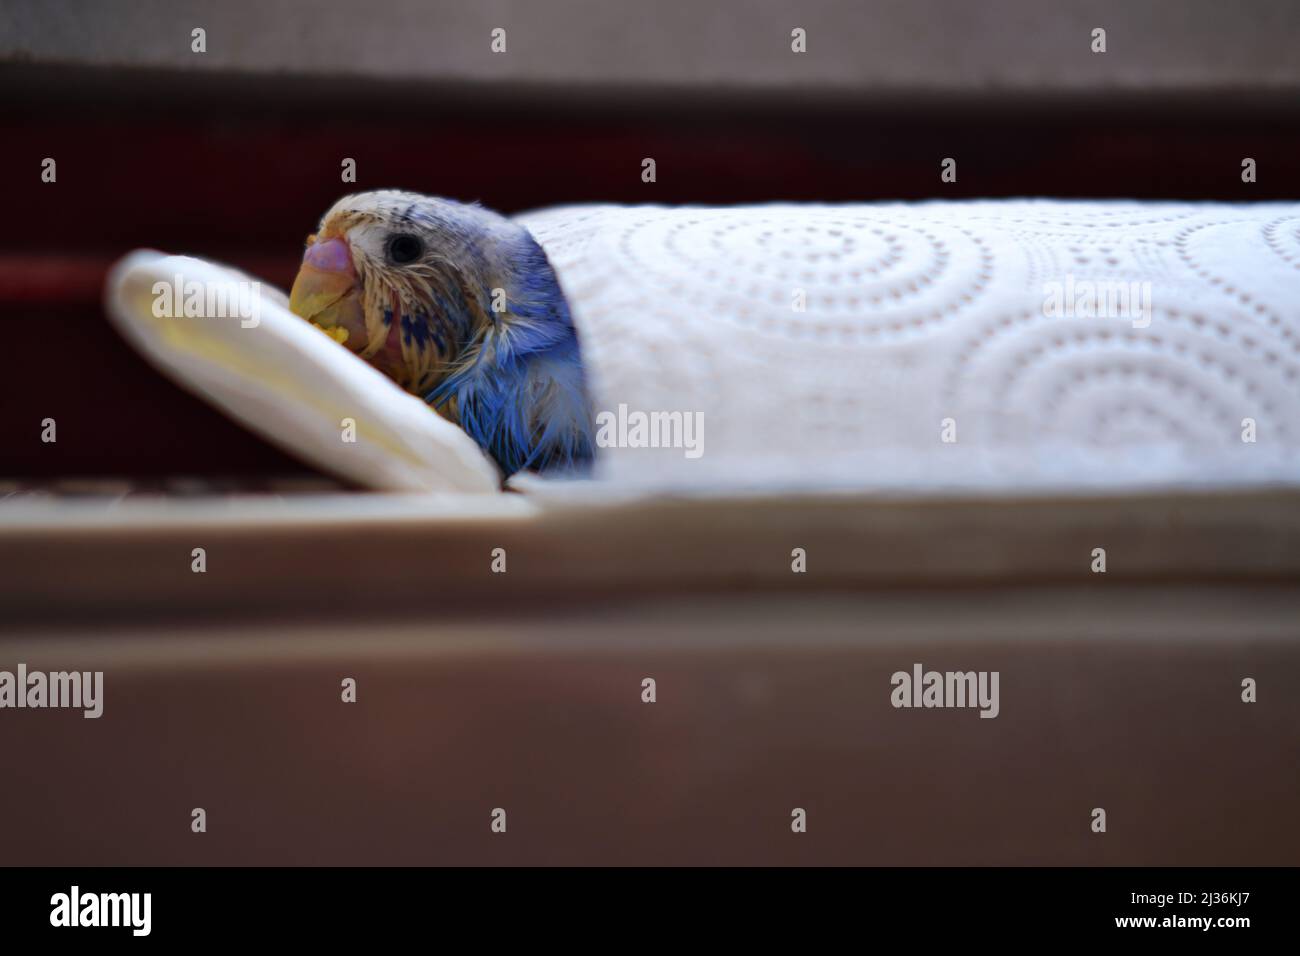 Sick little blue love bird, having fungal infection. Laying down on paper towel Stock Photo